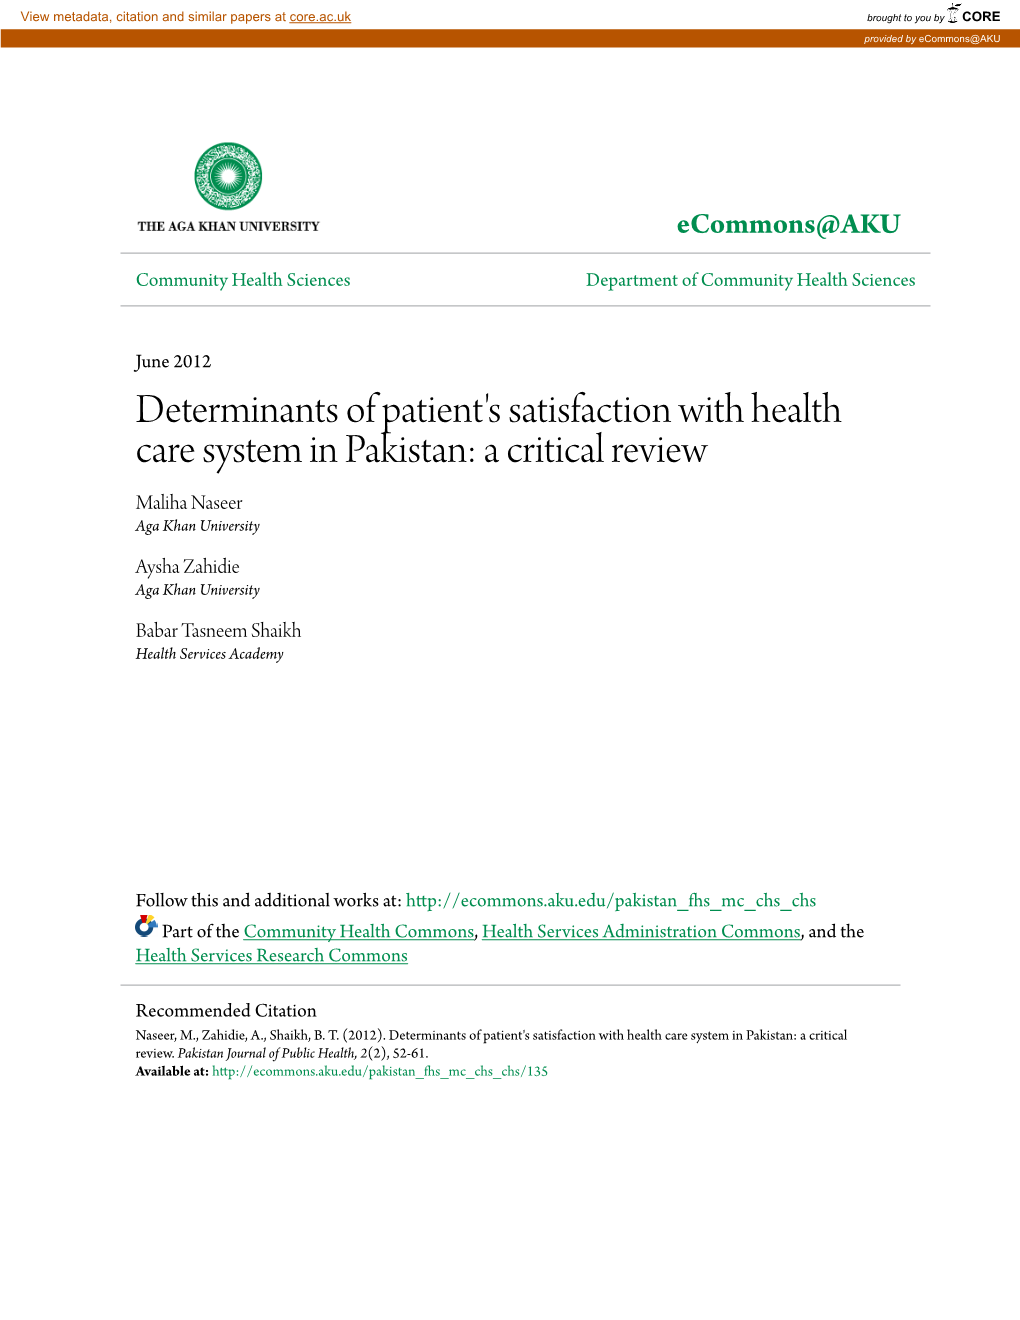 Determinants of Patient's Satisfaction with Health Care System in Pakistan: a Critical Review Maliha Naseer Aga Khan University